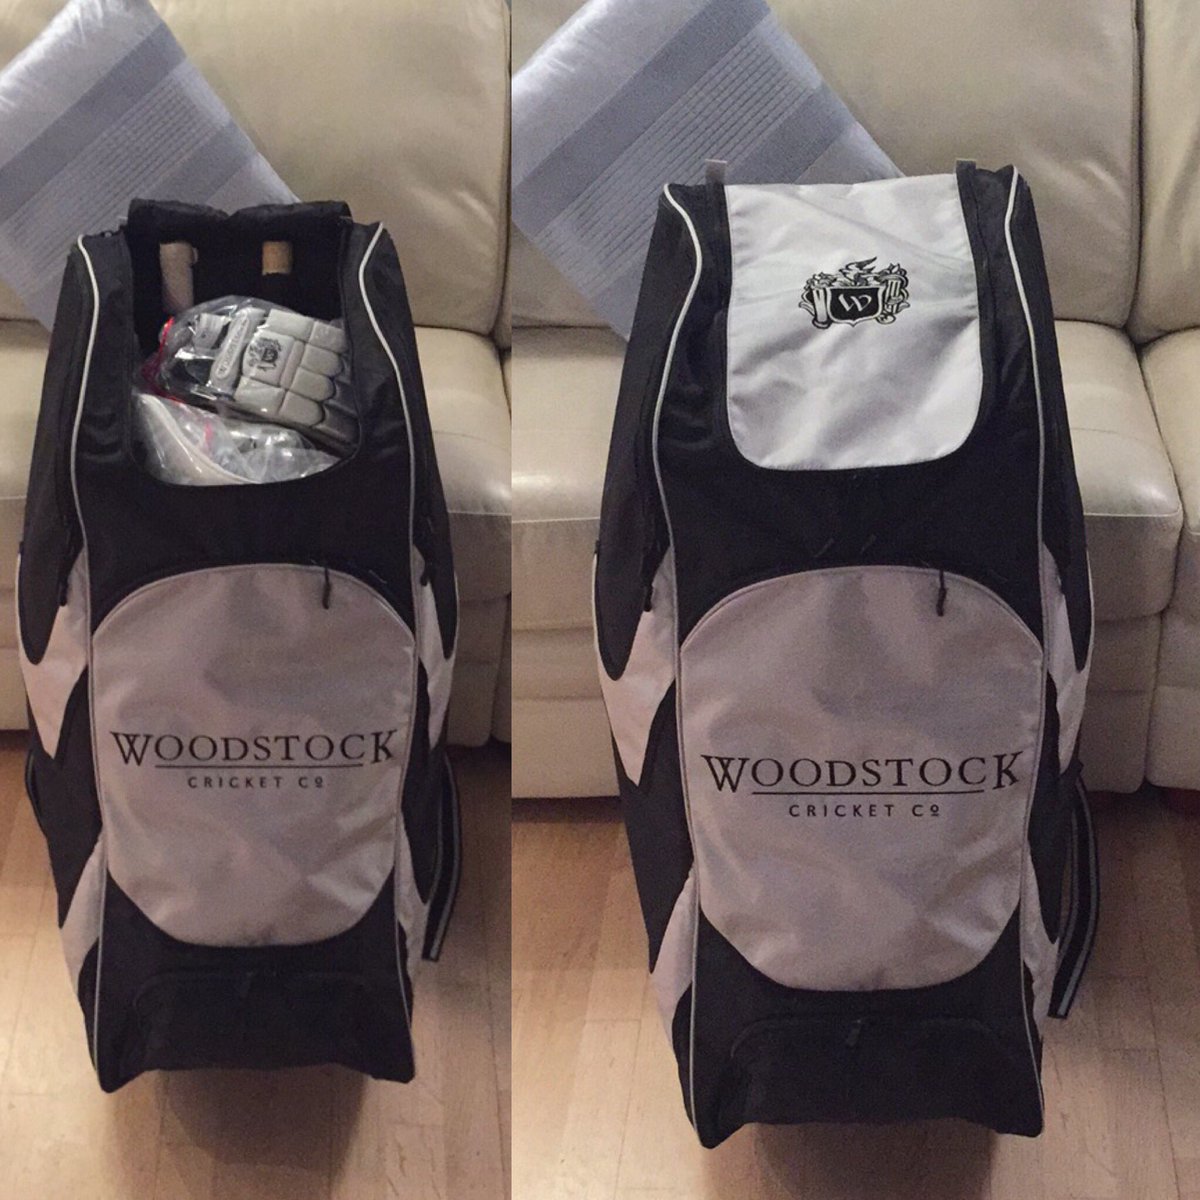 @WoodstockCricCo You never fail to produce! relationship 3 years and going strong! #CricketFamily #TeamWoodstock